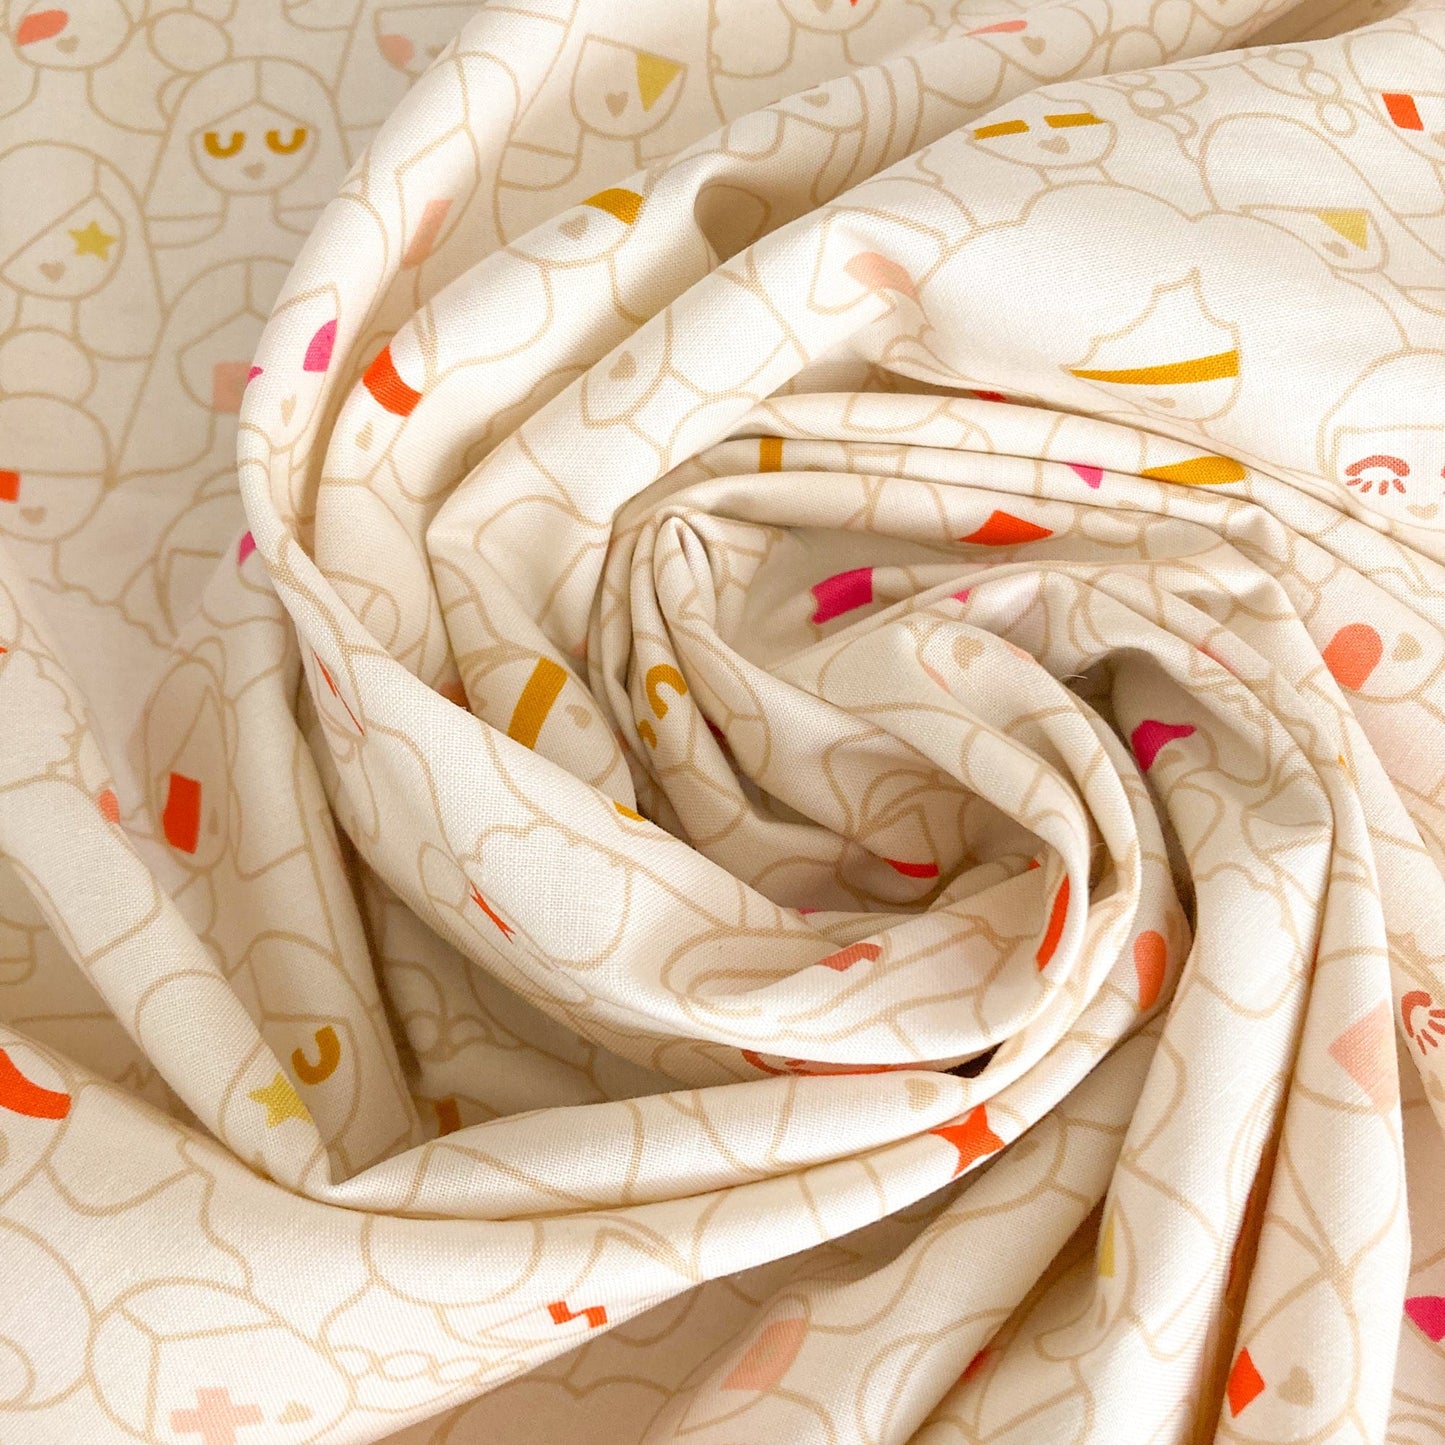 Ruby Star Society 'Sunbeam' Quilting Cotton 'Rebel Rebel' in Natural